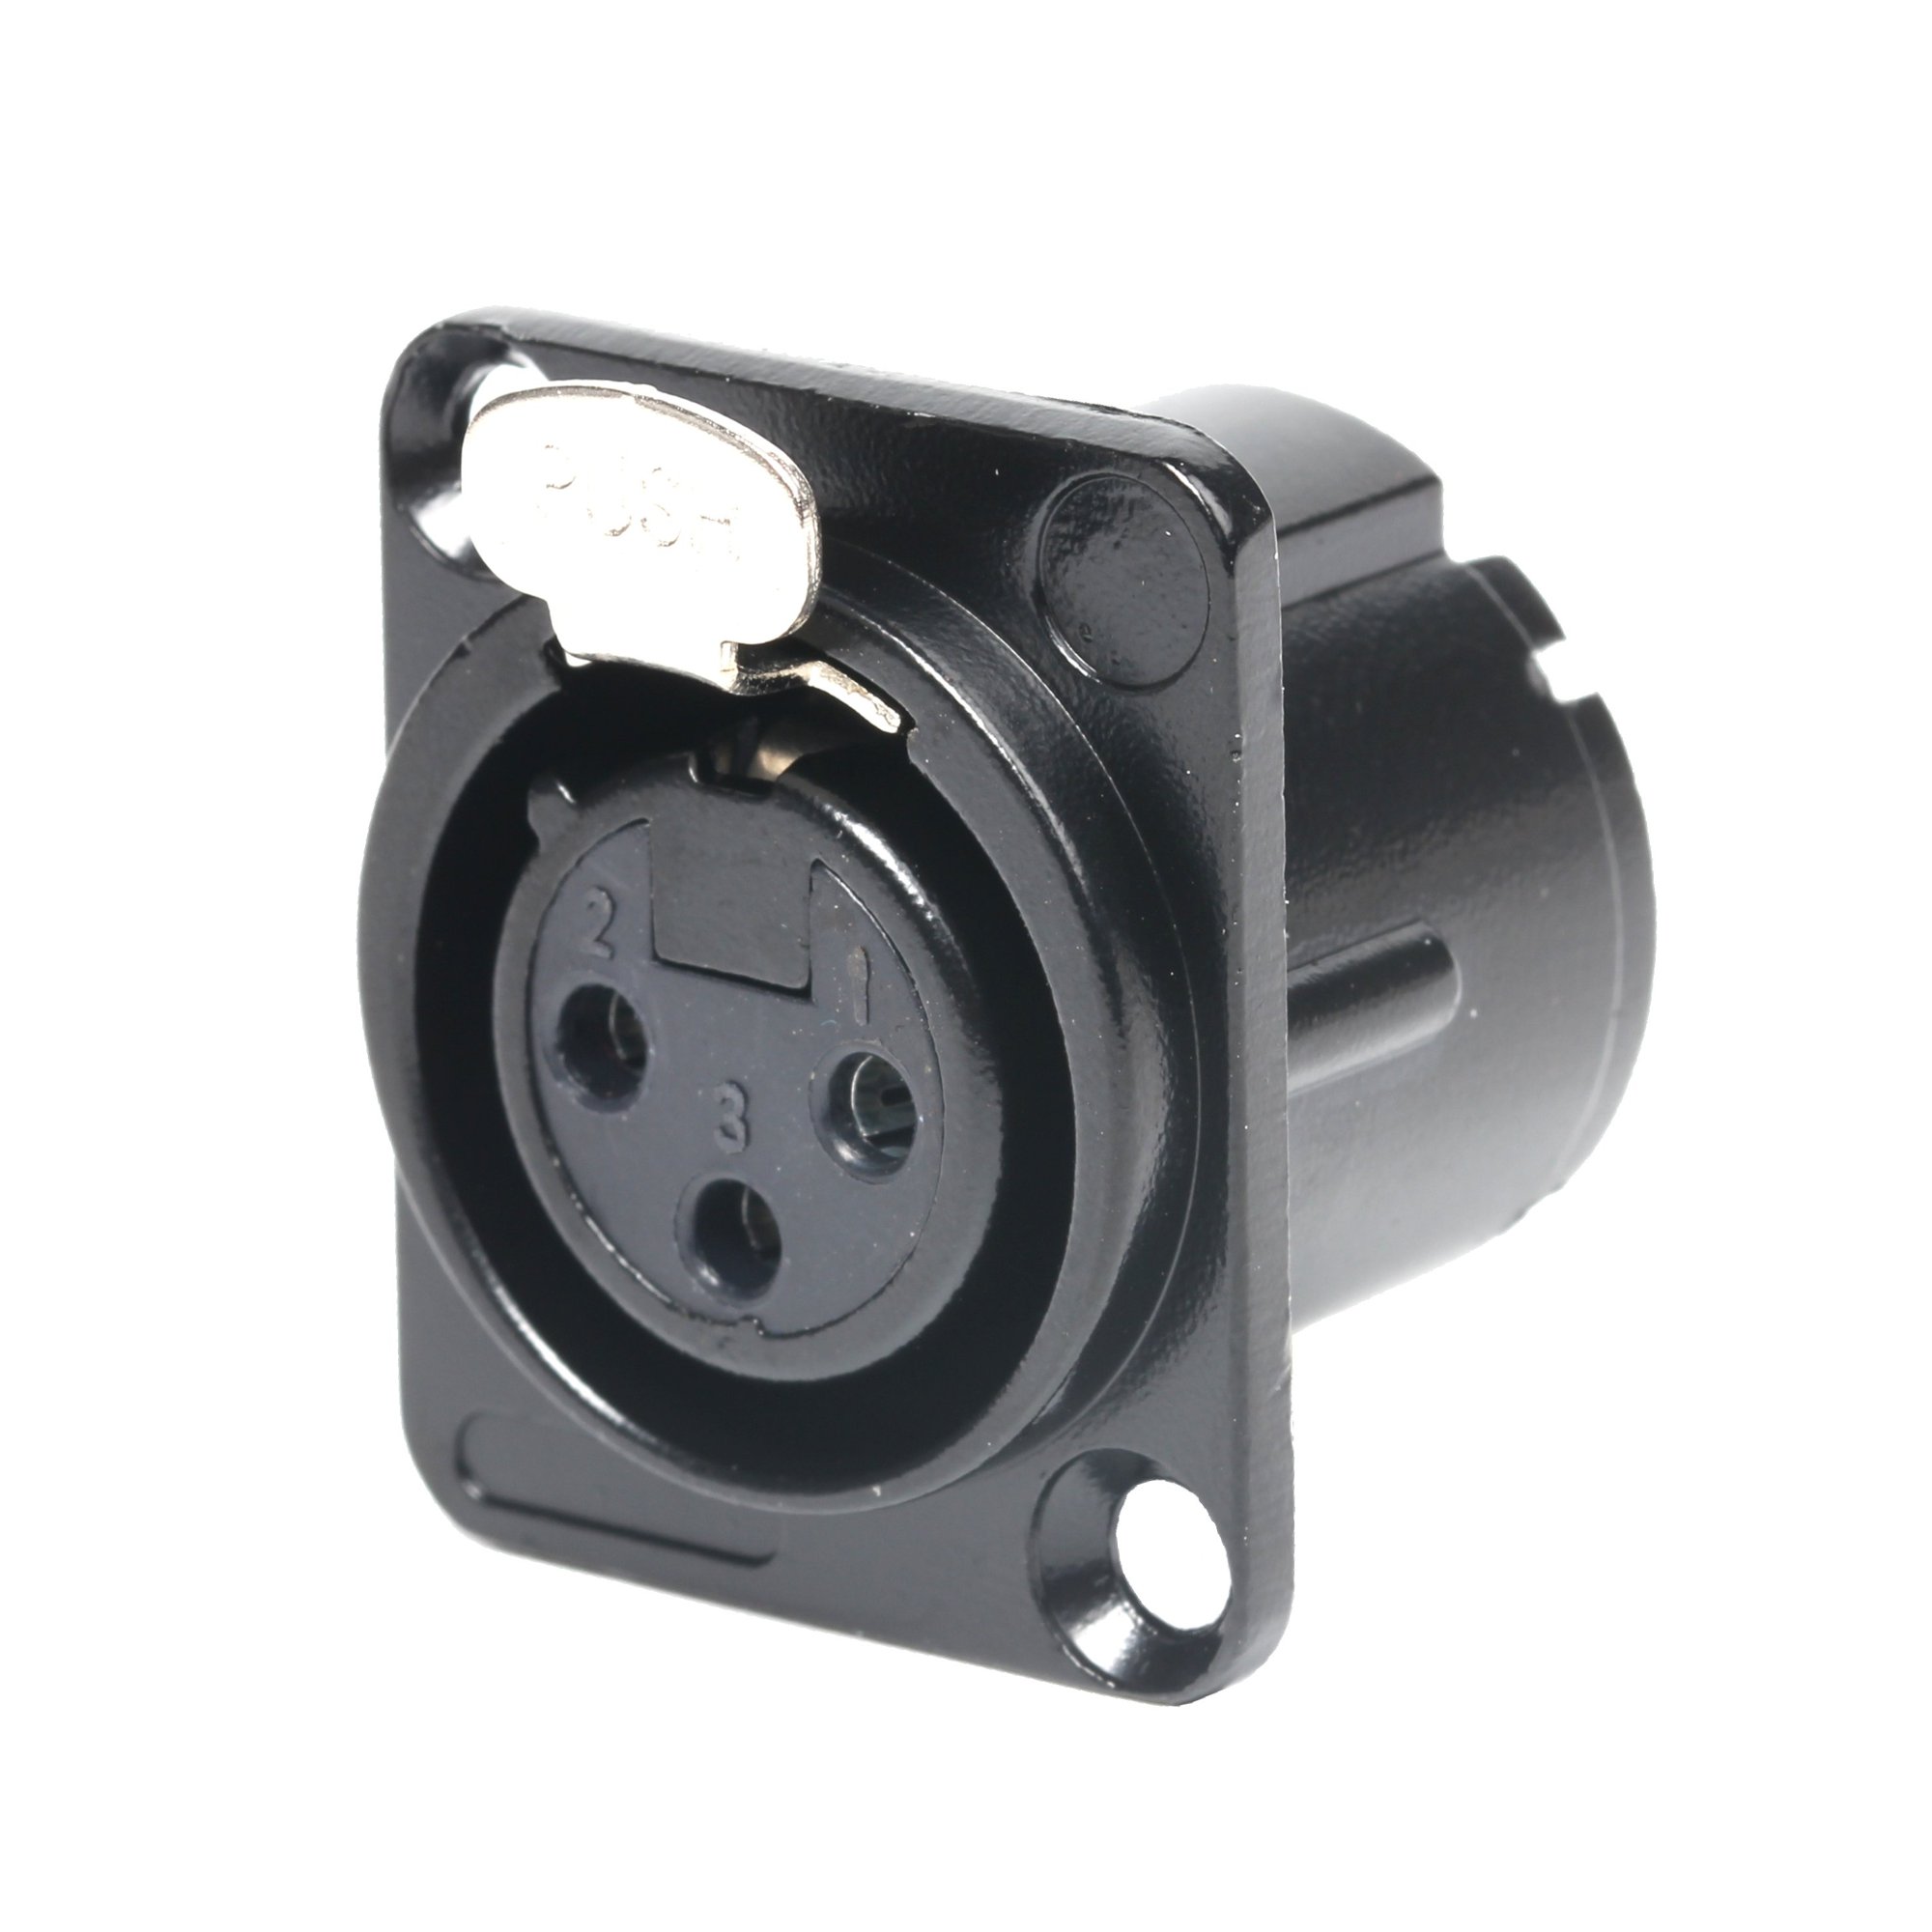 Black XLR Chassis Connector 3-Pin Female D-Type from Emelec ViasCom